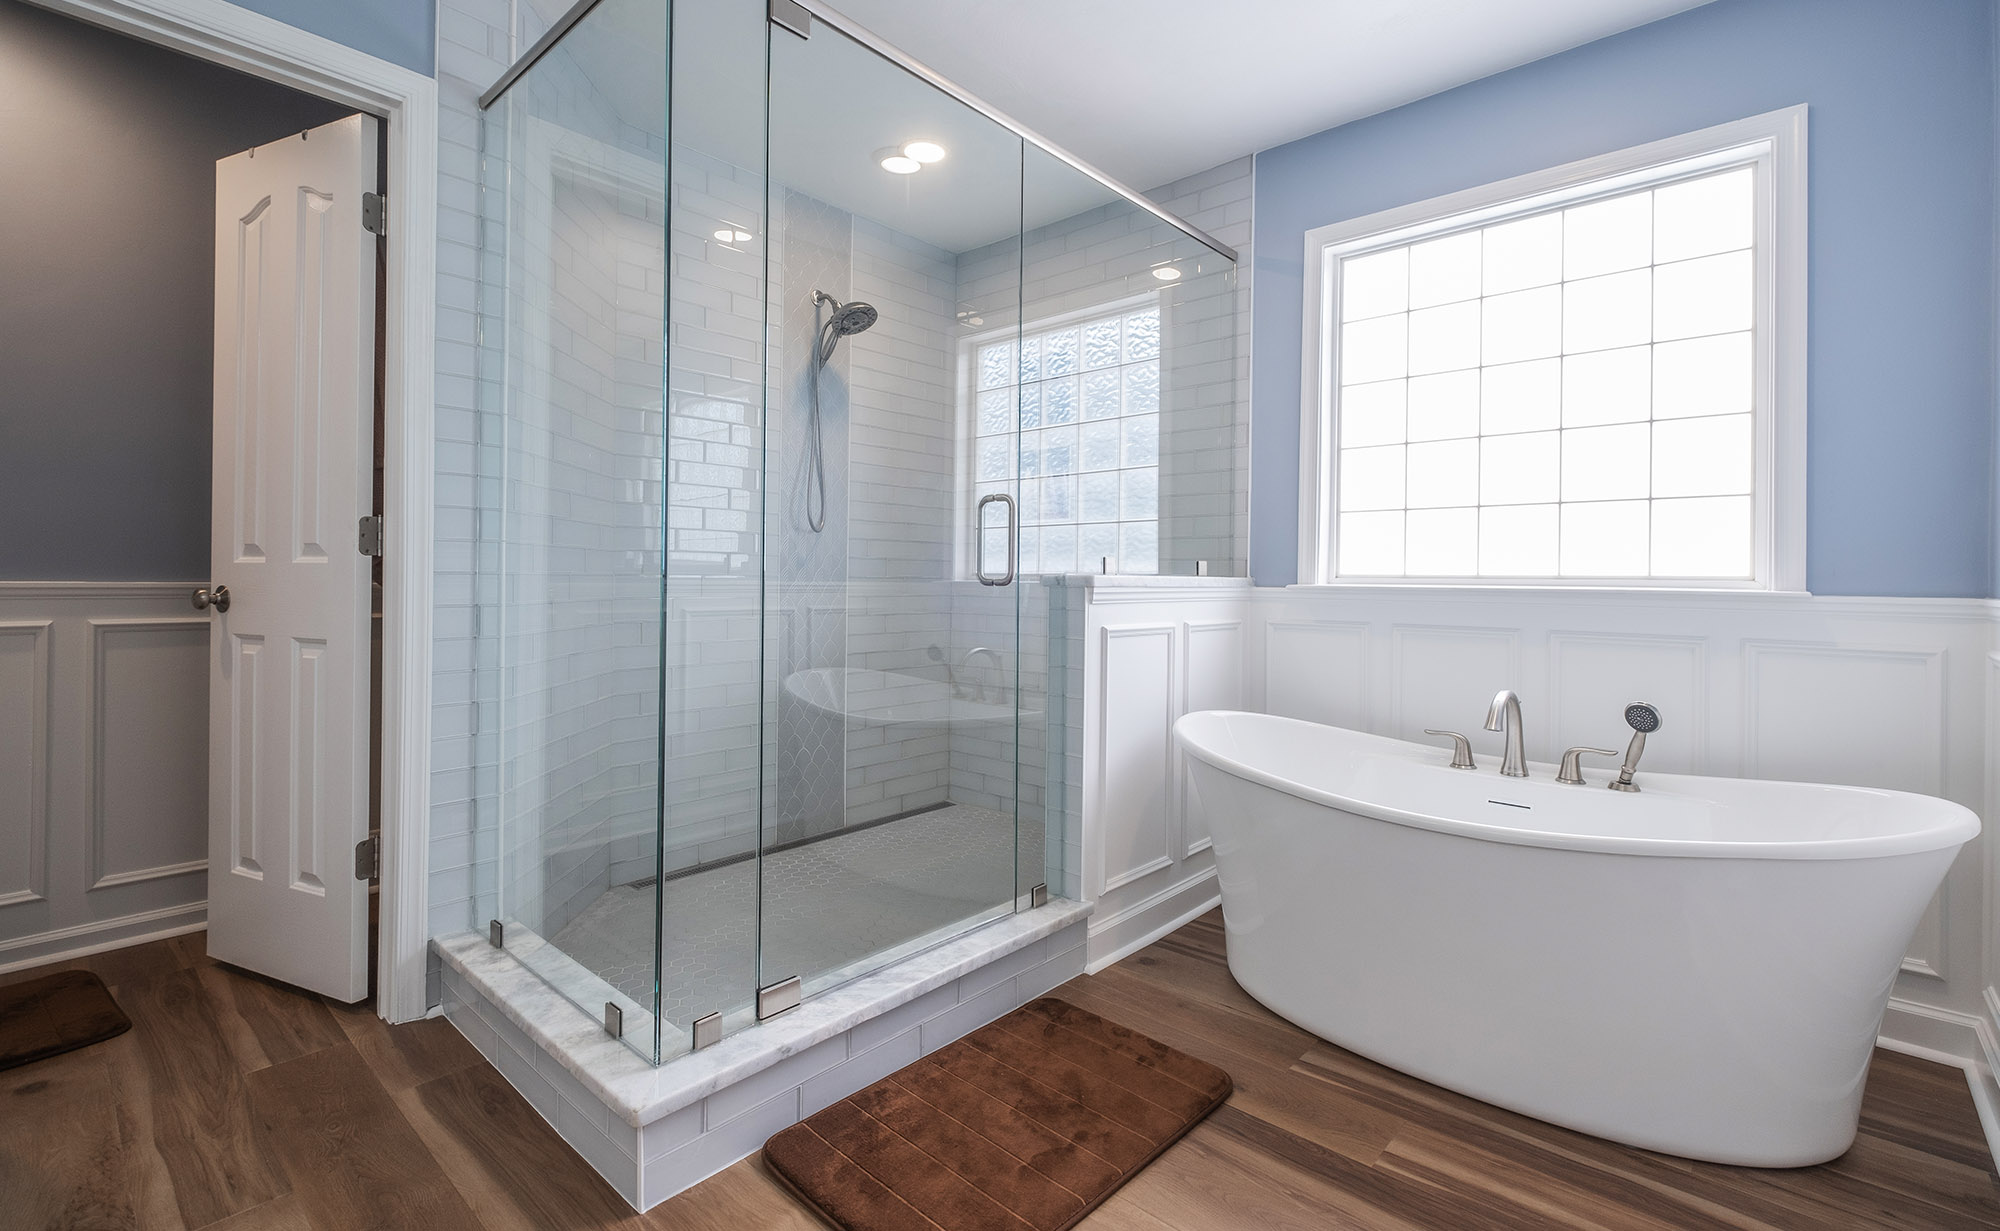 Large master bathroom remodeling project. Soaking tub with large walk in shower with glass doors and walls.